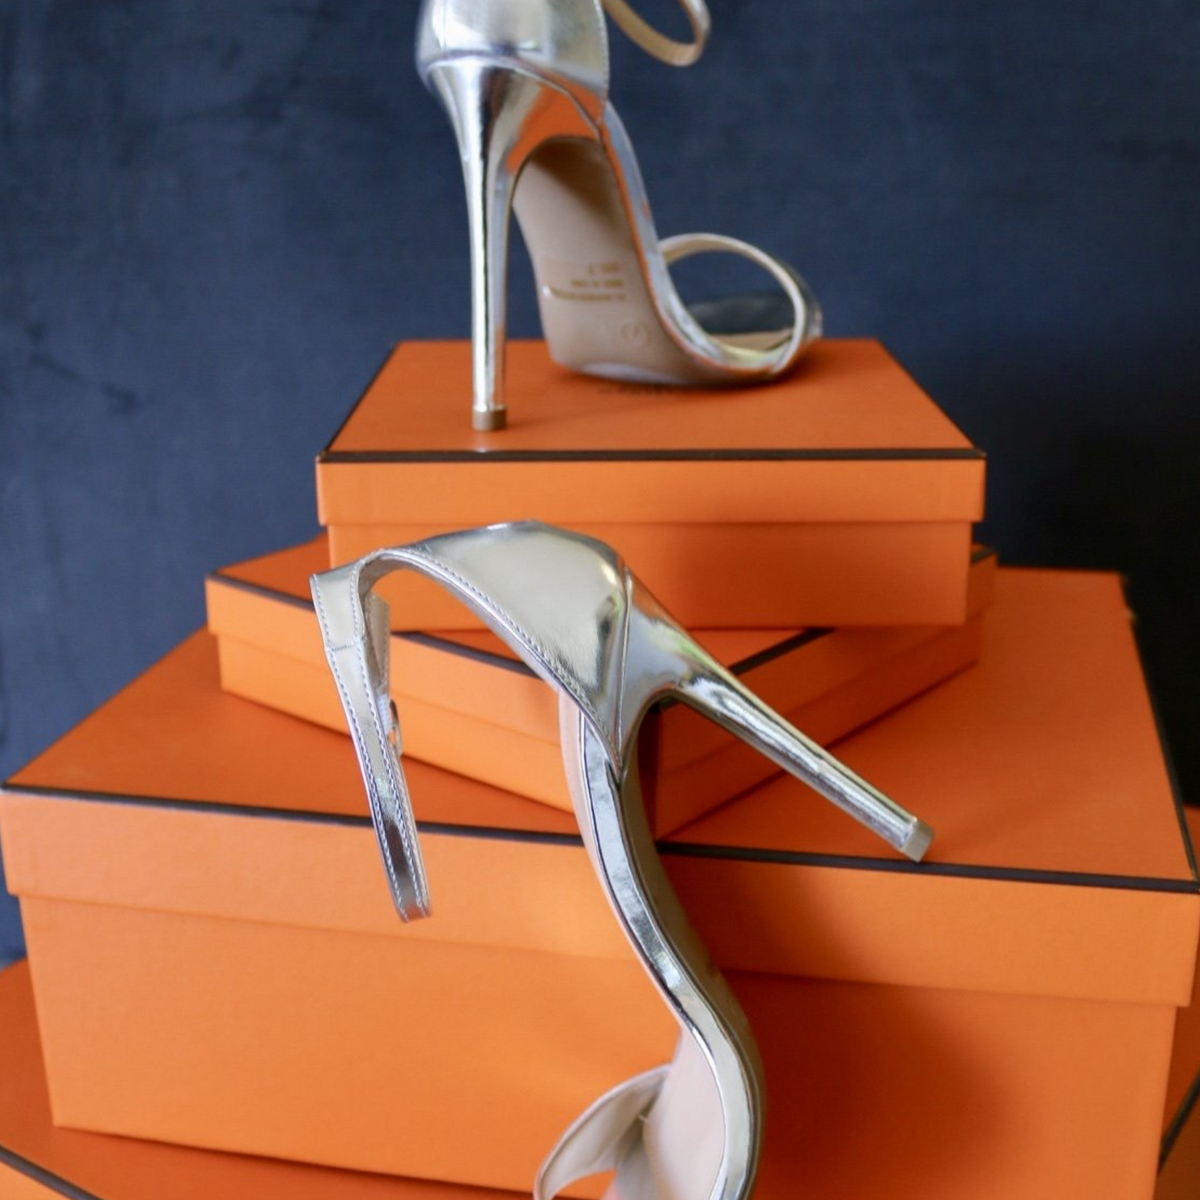 Study finds women in high heels are perceived as more attractive, feminine,  and higher status